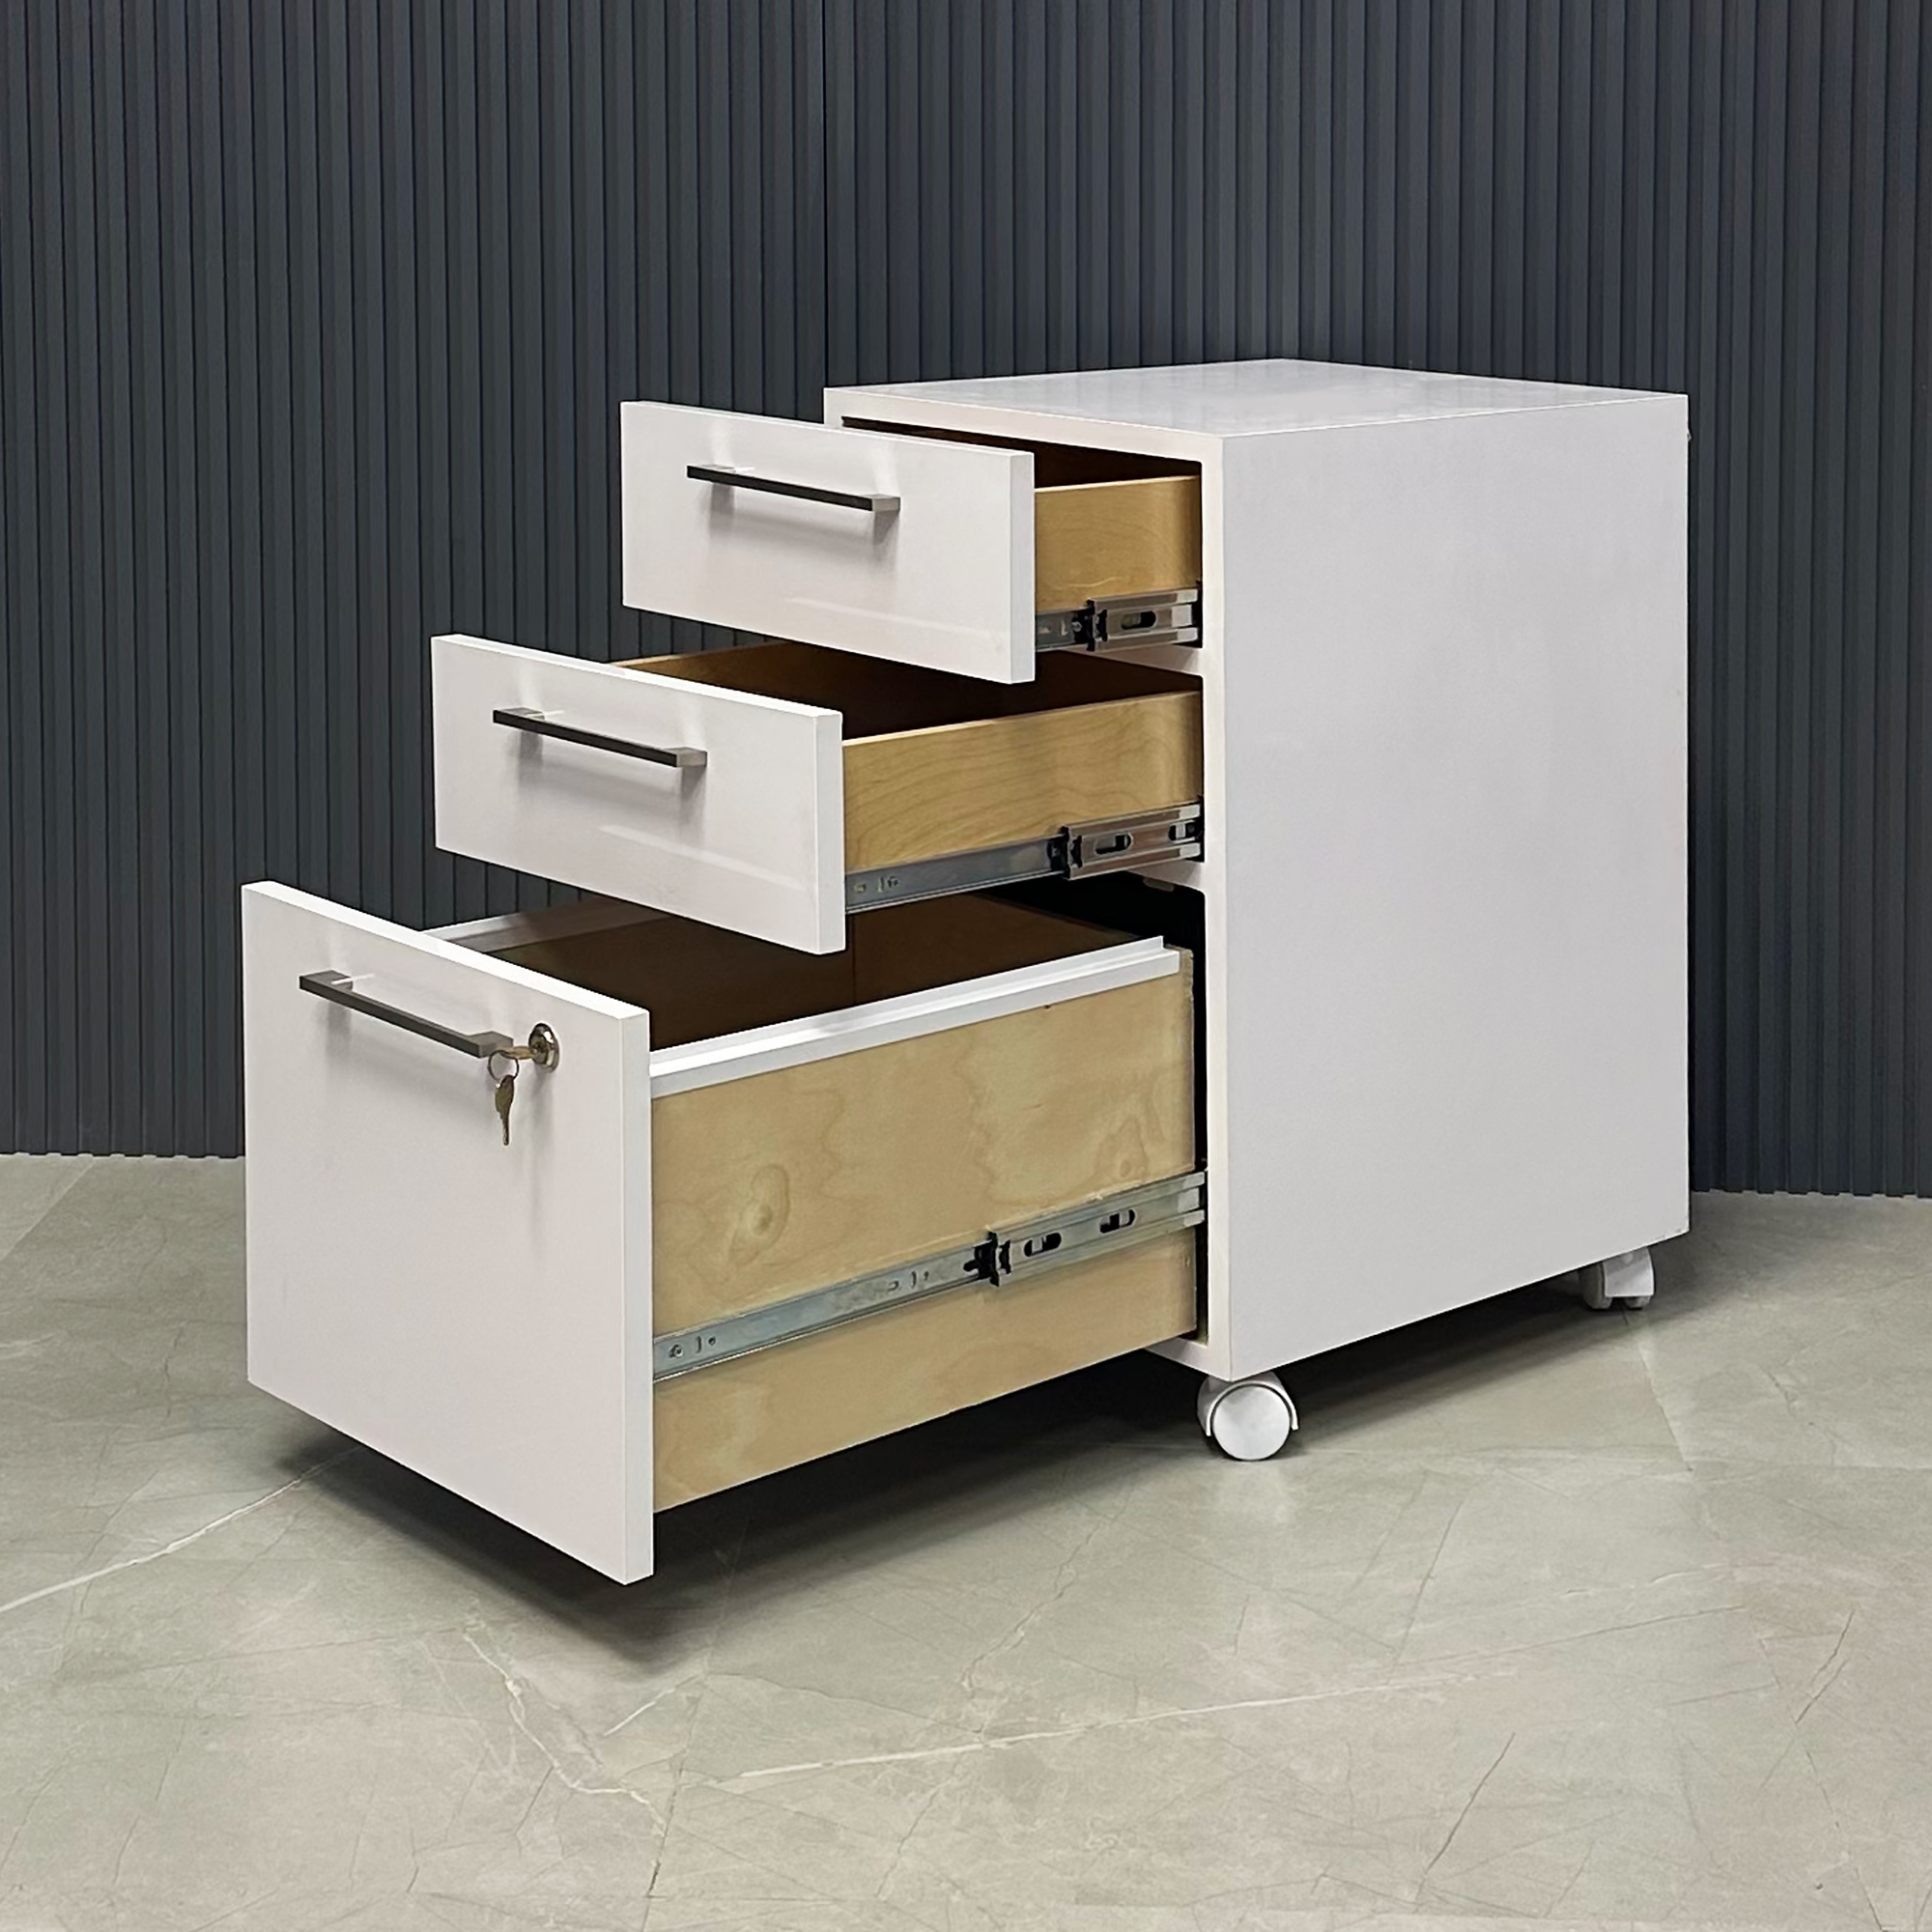 15 3/4 inches Naples Mobile Storage - 3 drawers- W/ Lock in white gloss laminate finish shown here.